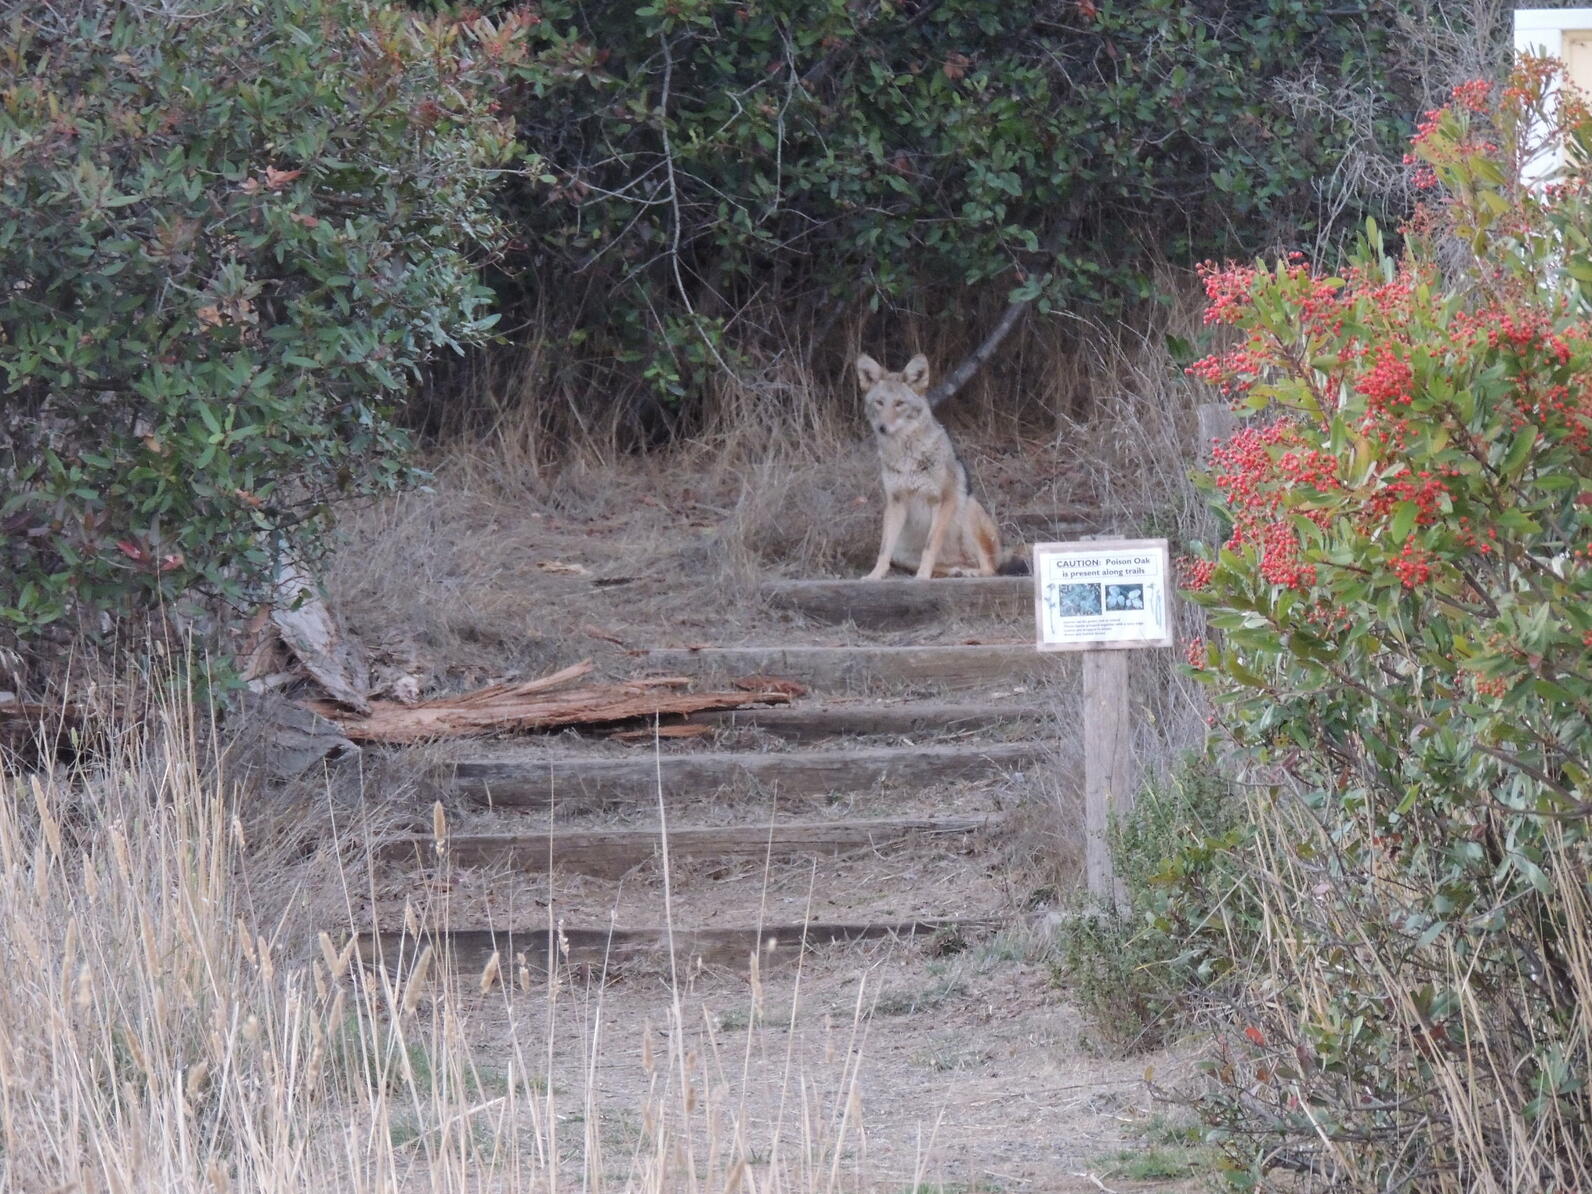 A coyote sitting on a hiking trail at Richardson Bay.